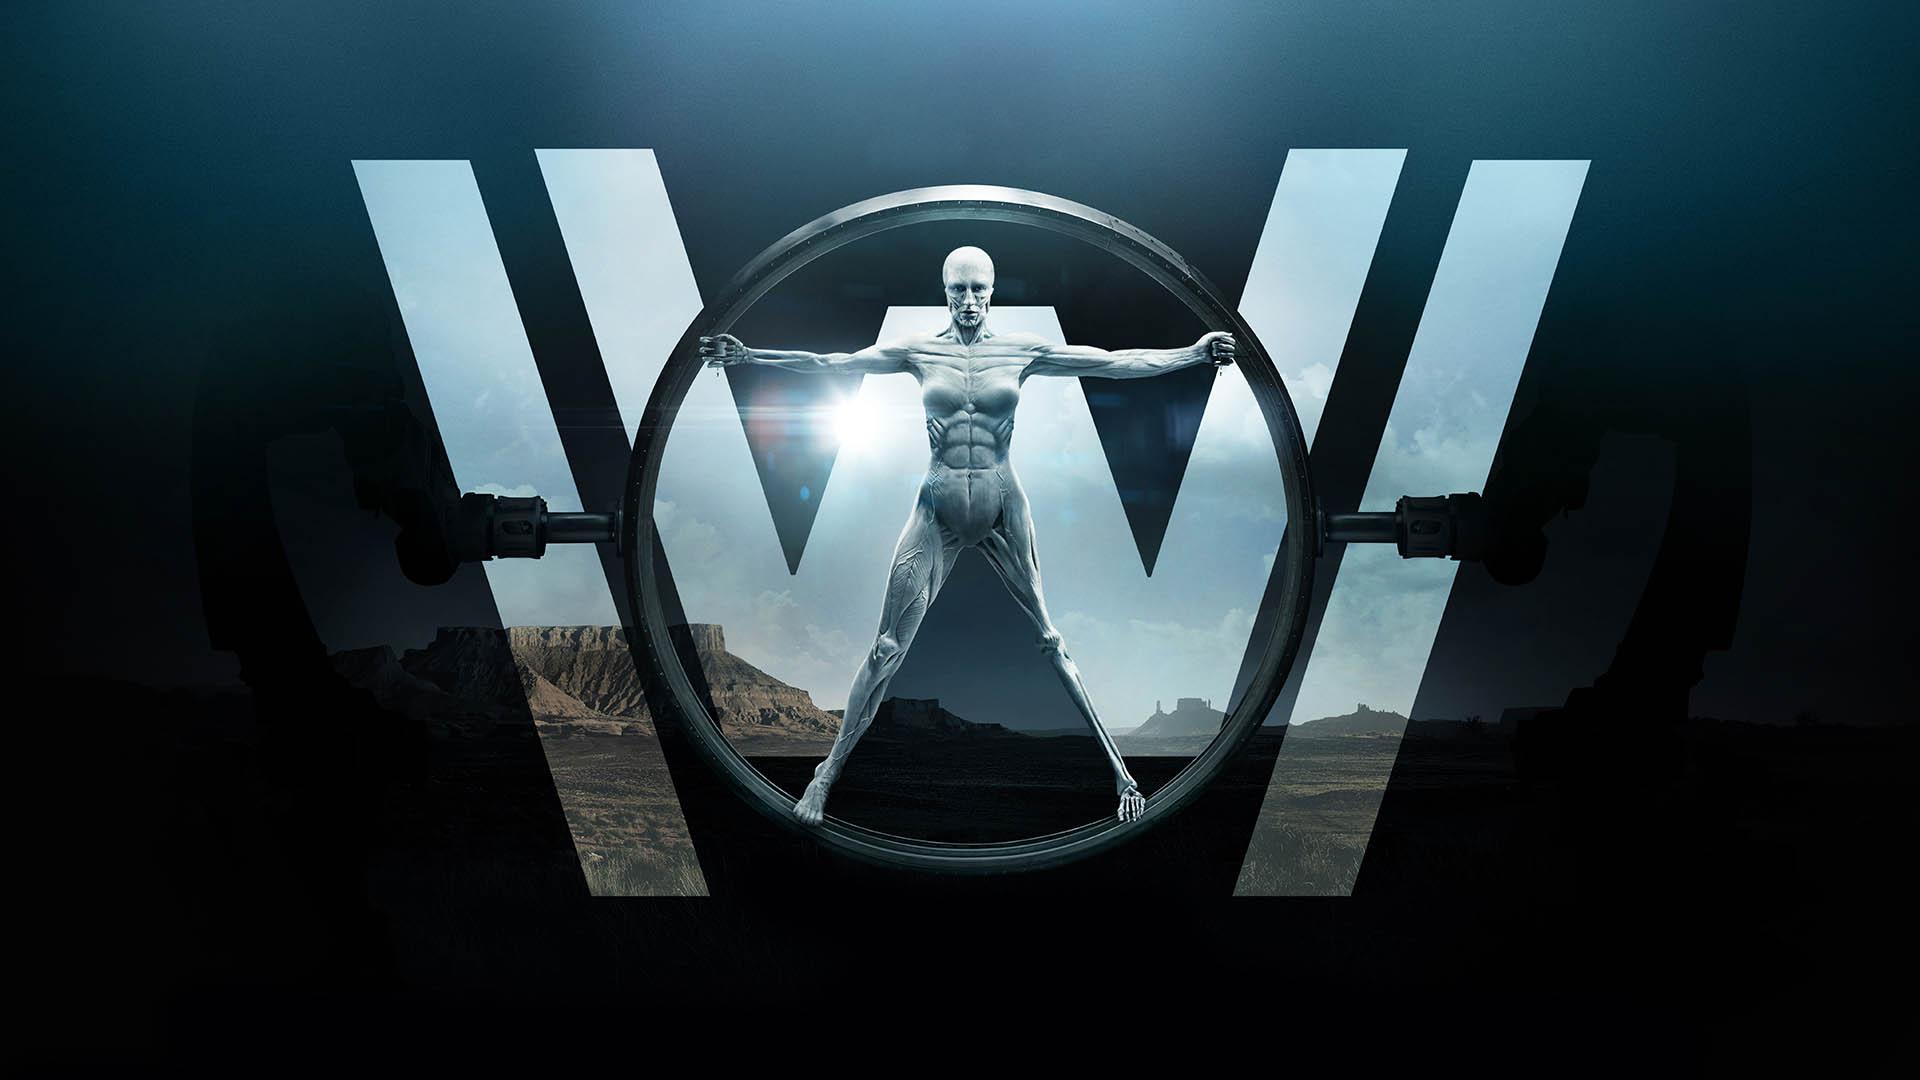 Westworld Website for the HBO Series